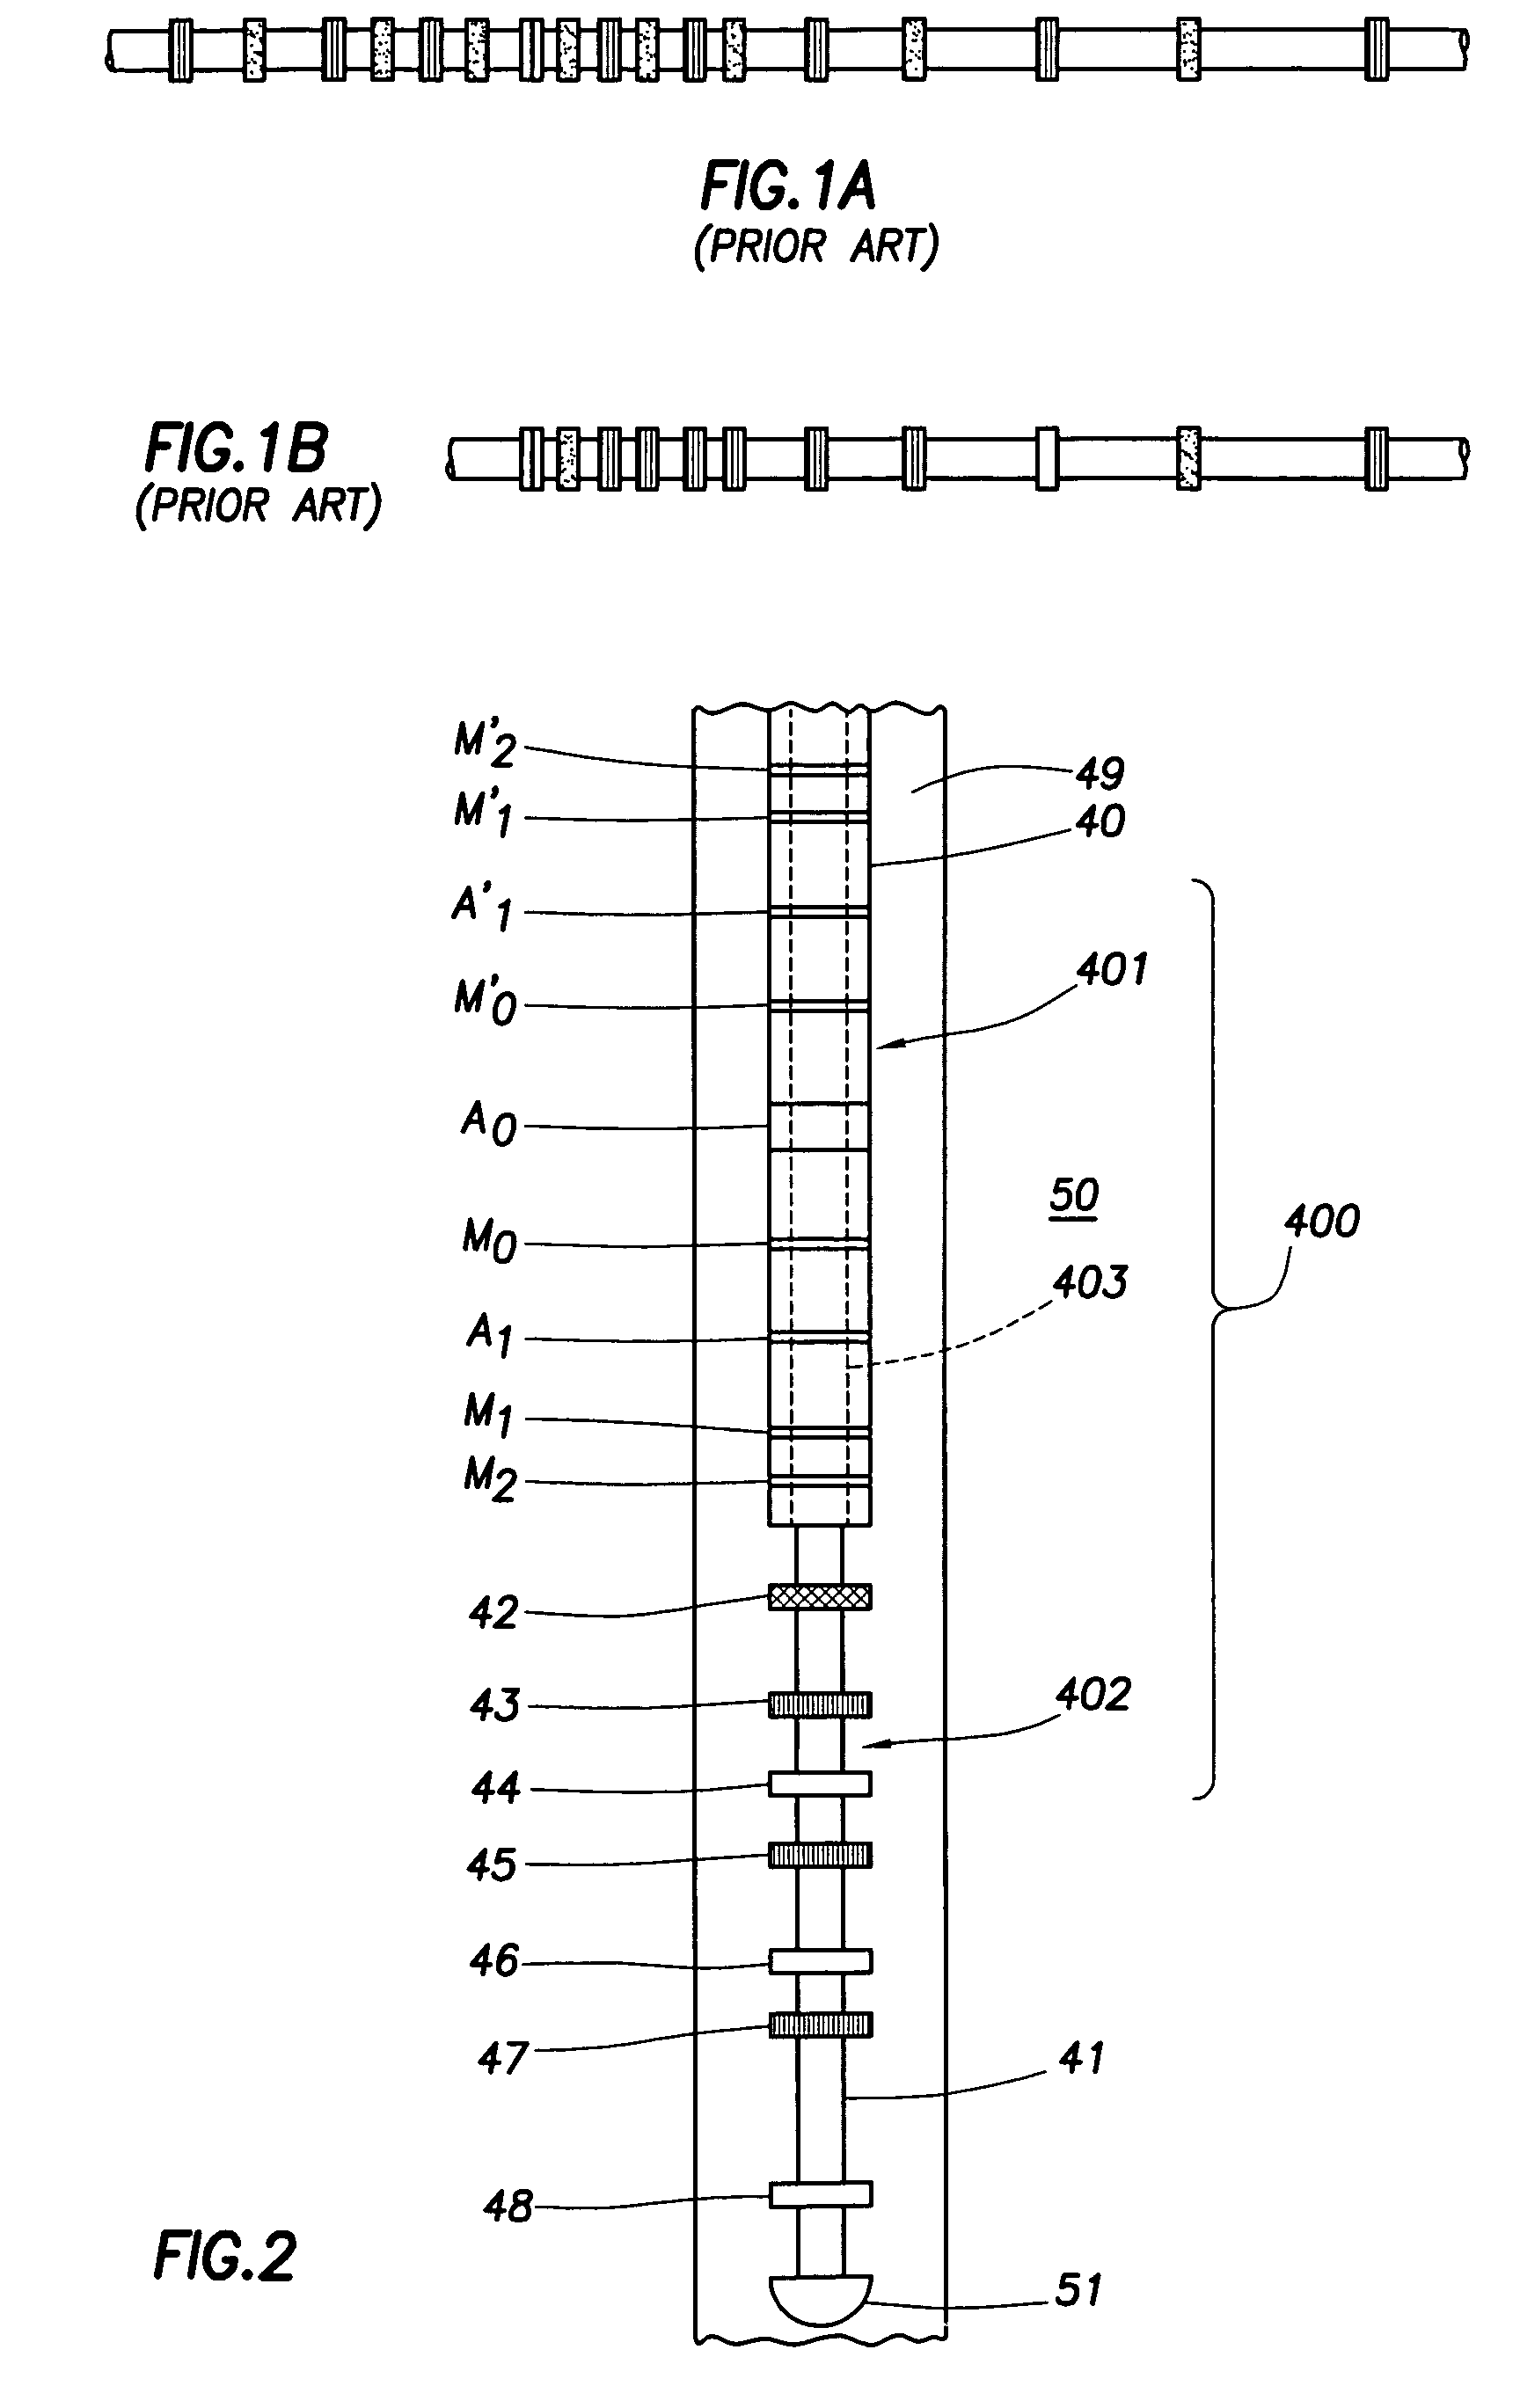 [apparatus and methods for induction-sfl logging]